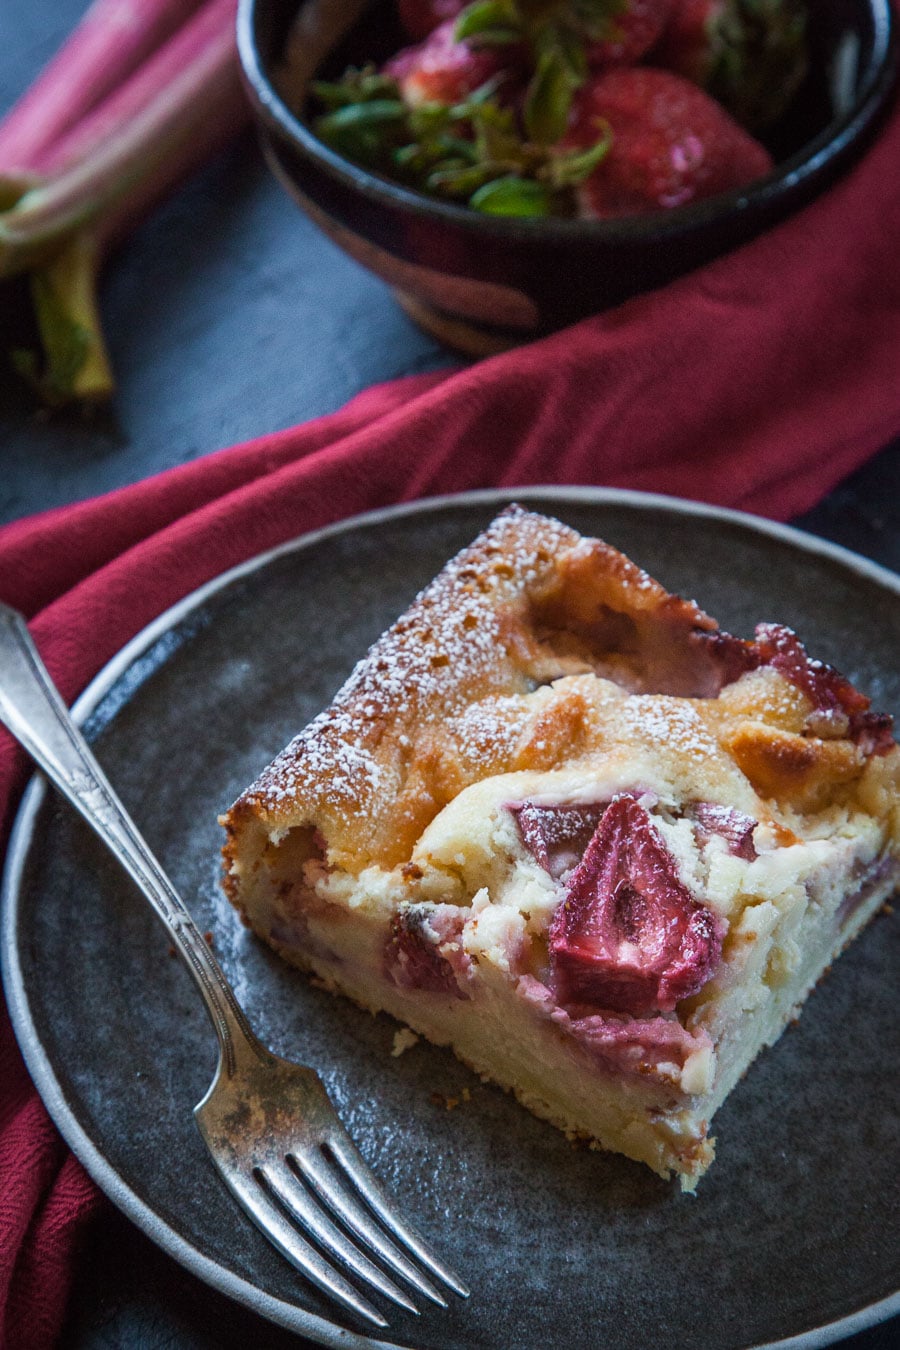 Strawberry Rhubarb Buckle with Cheesecake Topping. Photo and recipe by Irvin Lin of Eat the Love.